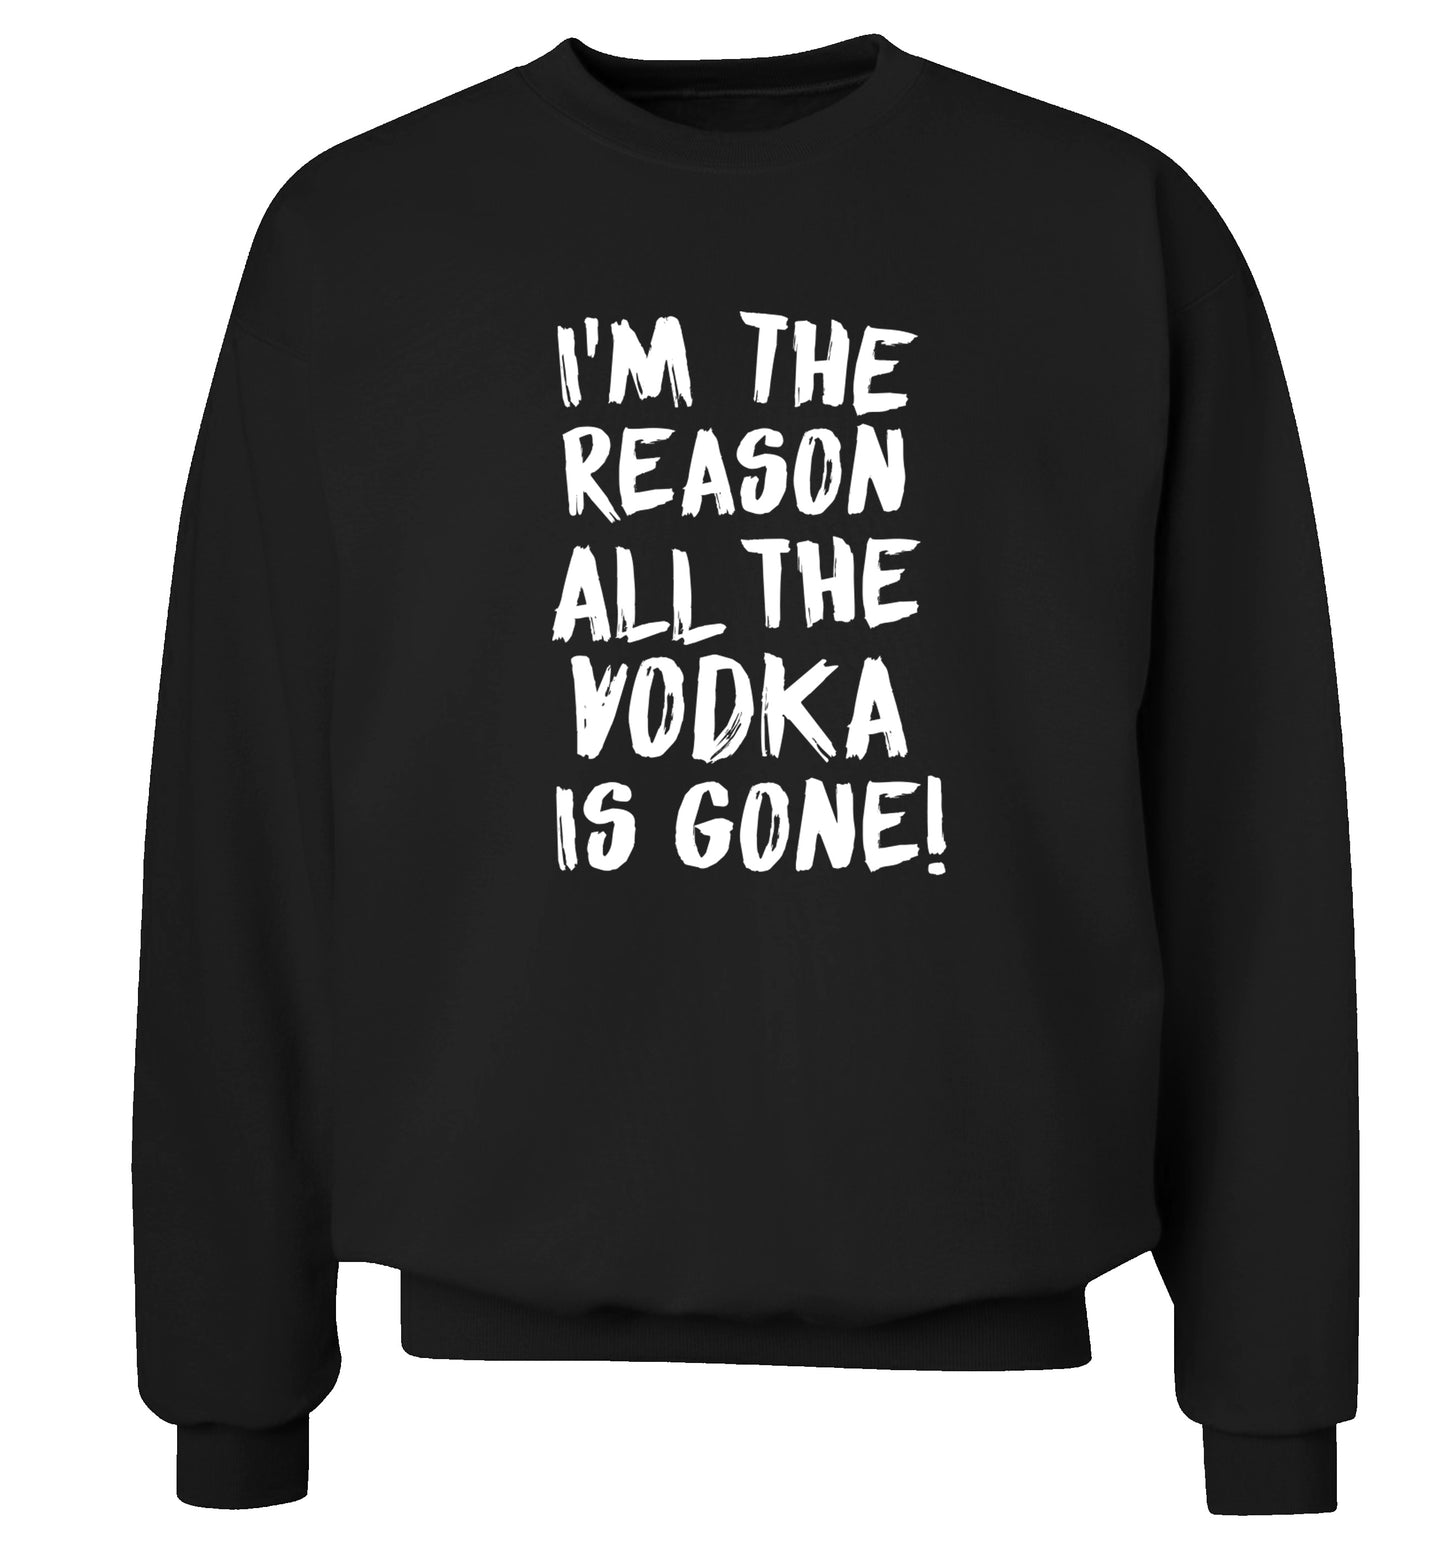 I'm the reason all the tequila is gone Adult's unisex black Sweater 2XL